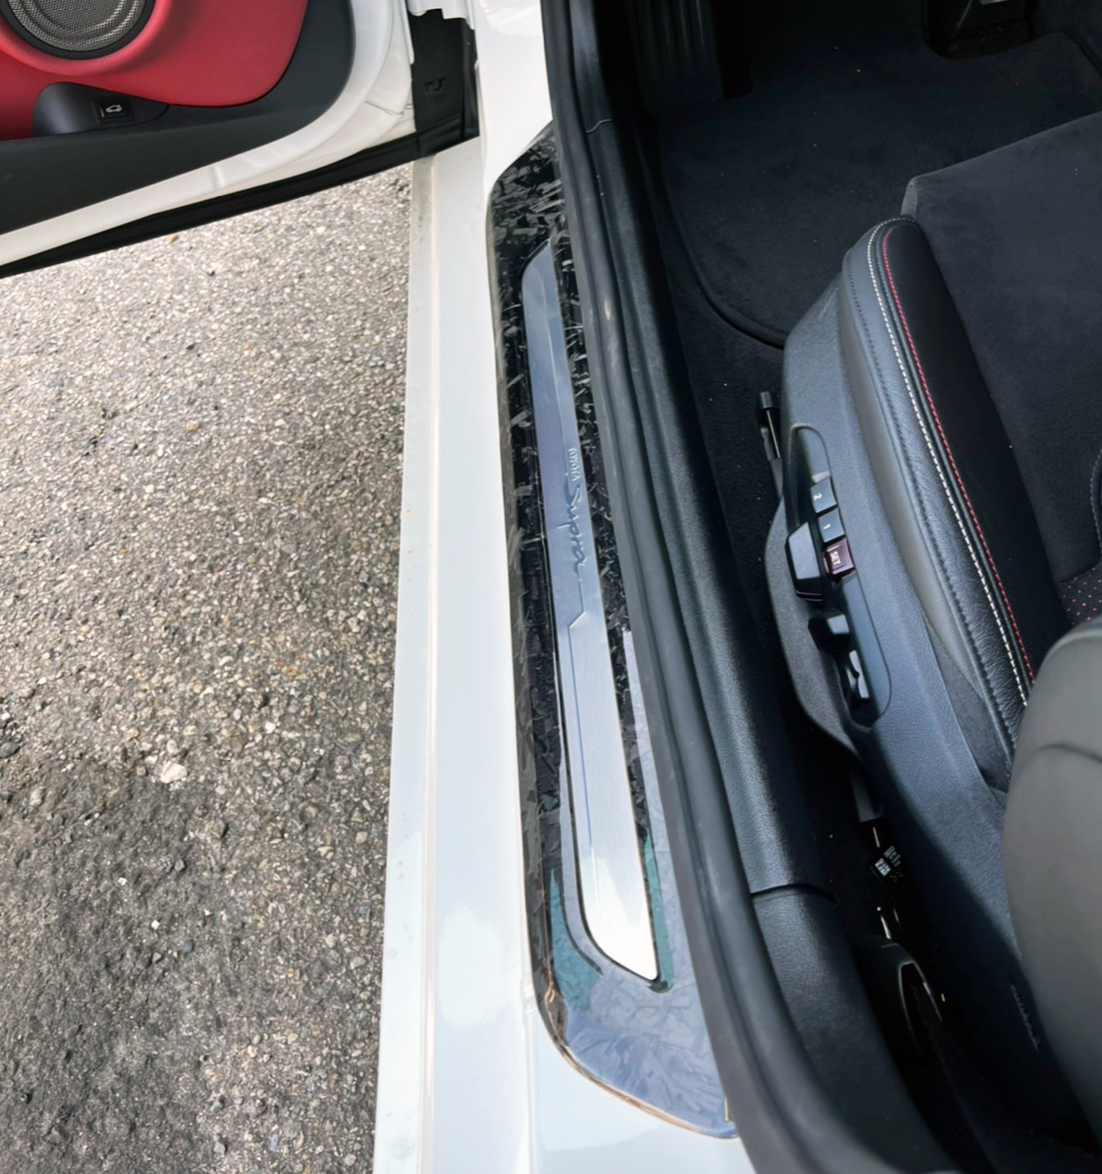 Rexpeed Forged Carbon Fiber Door Sill Cover (MK5 Supra)